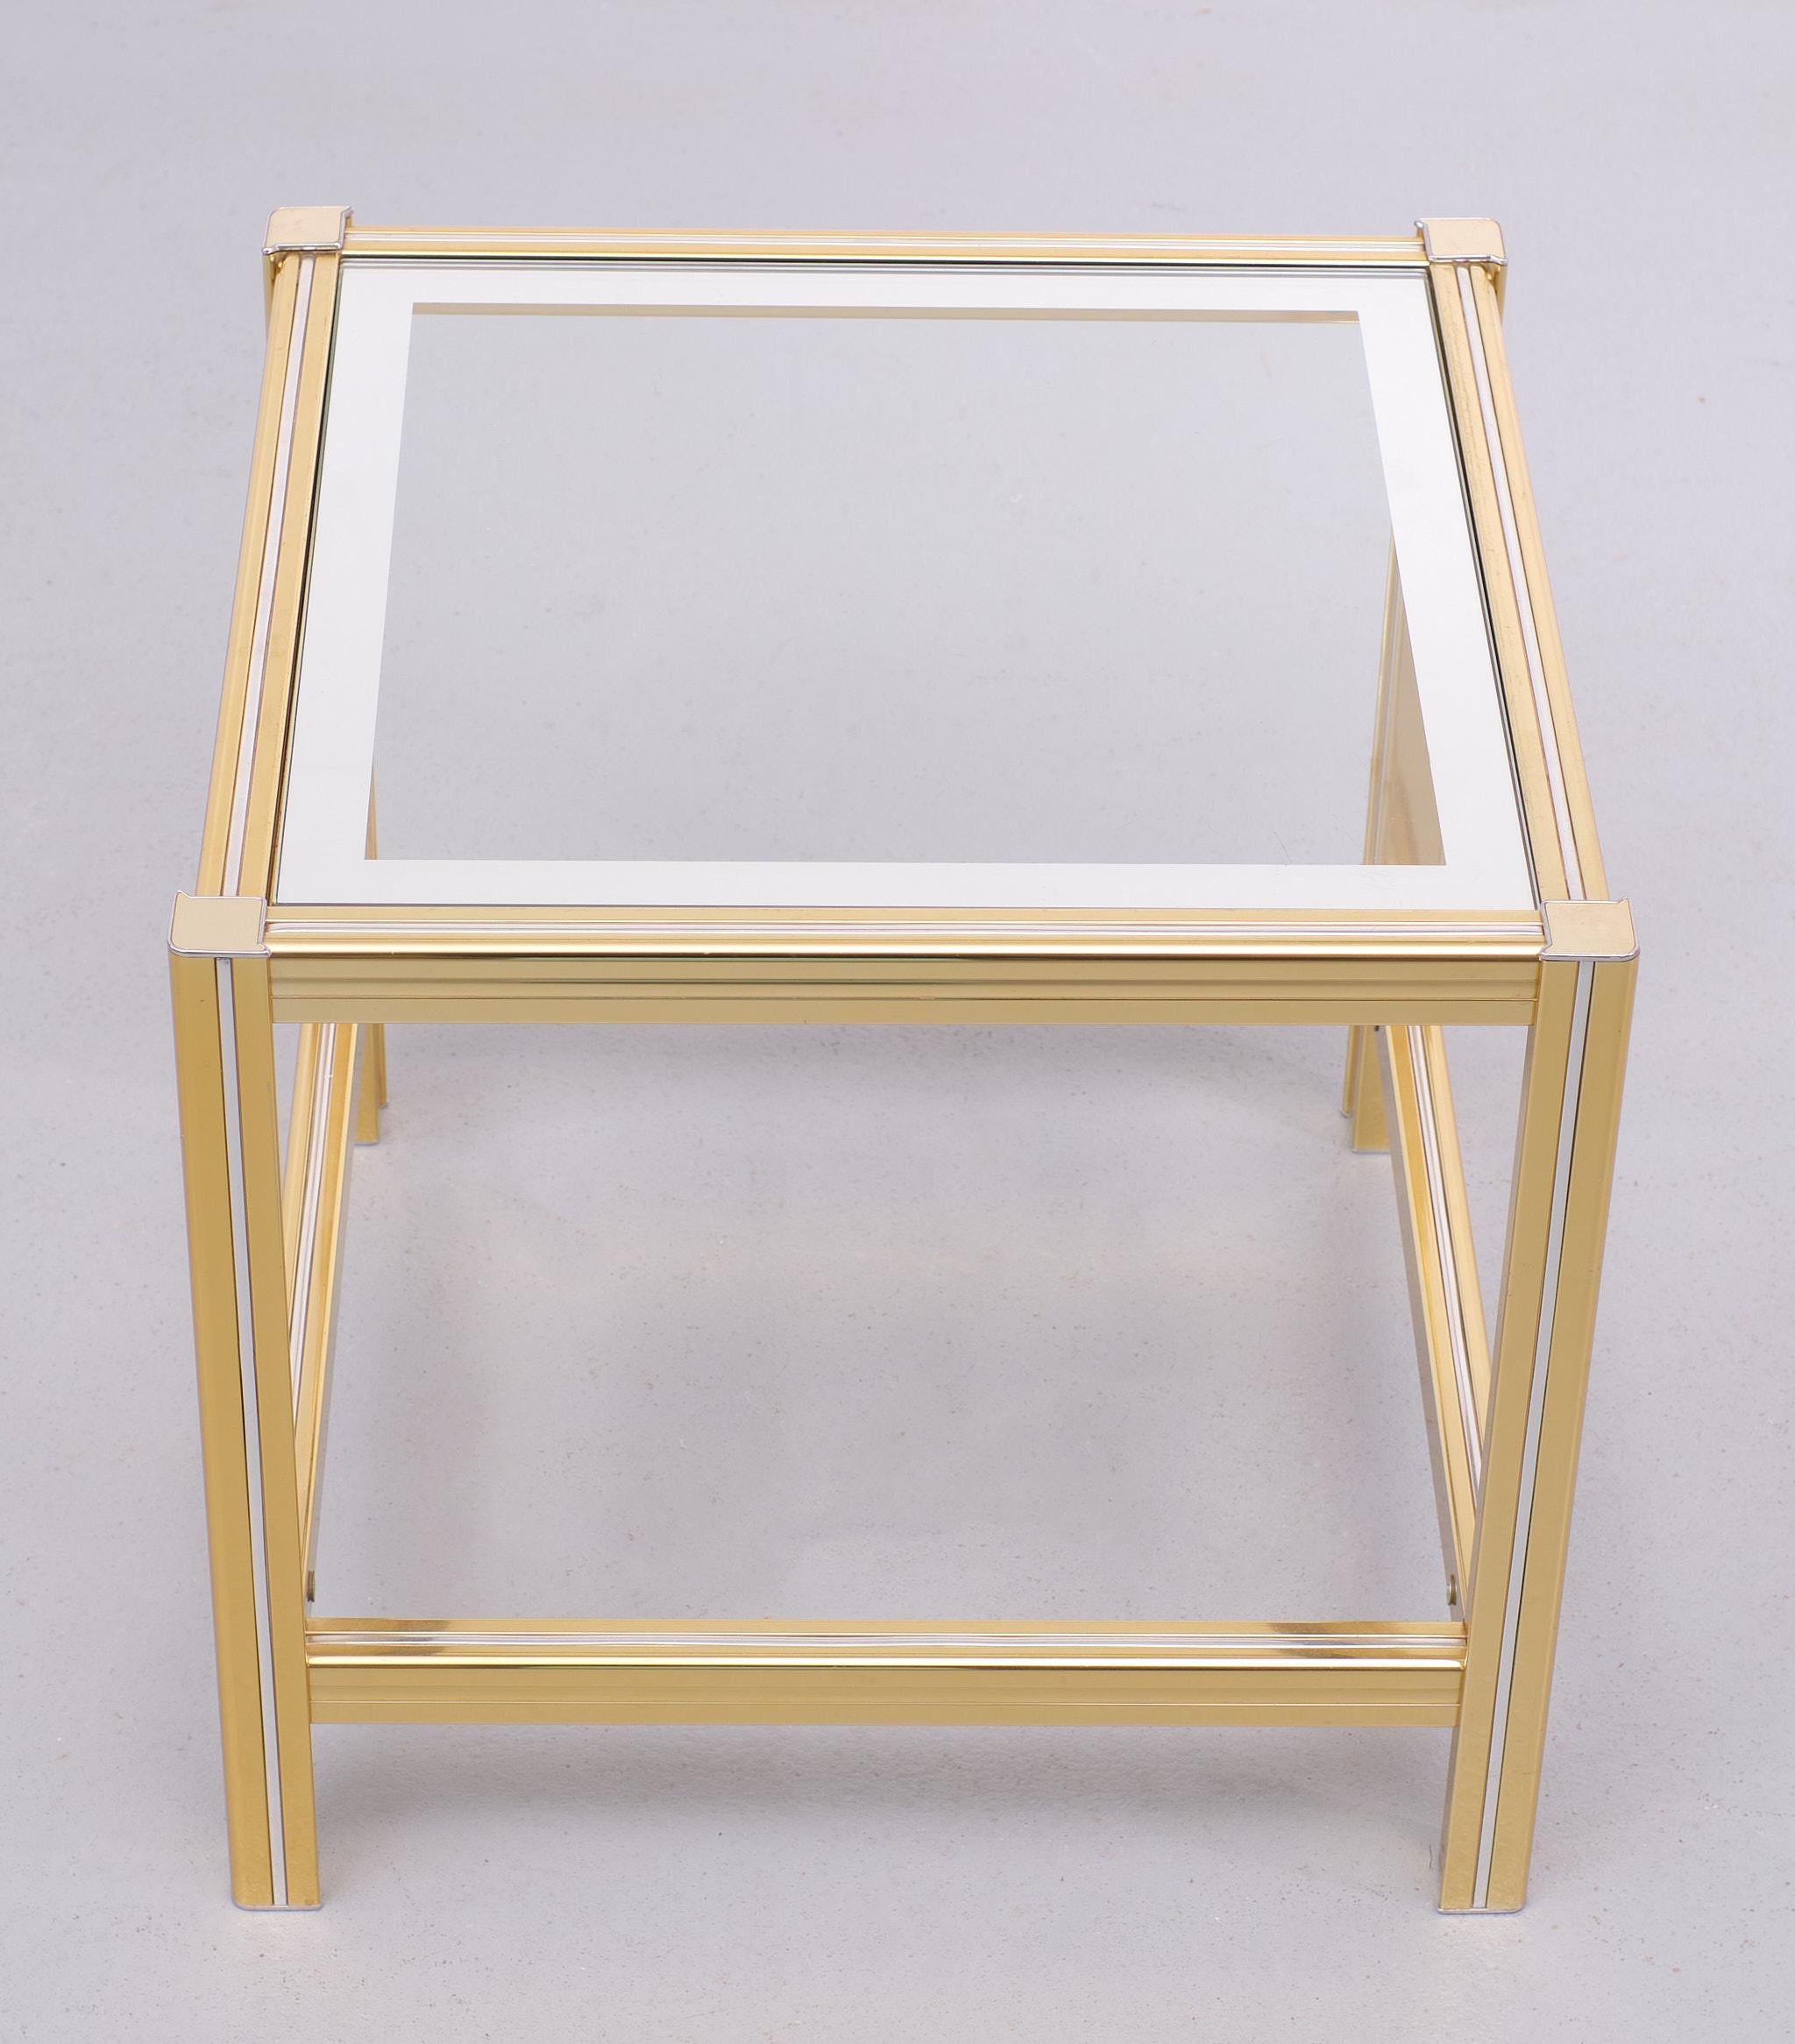 Very nice Hollywood Regency side table or end table. Brass with Chrome inlay,
comes with its original glass top with mirror lining. Good condition.